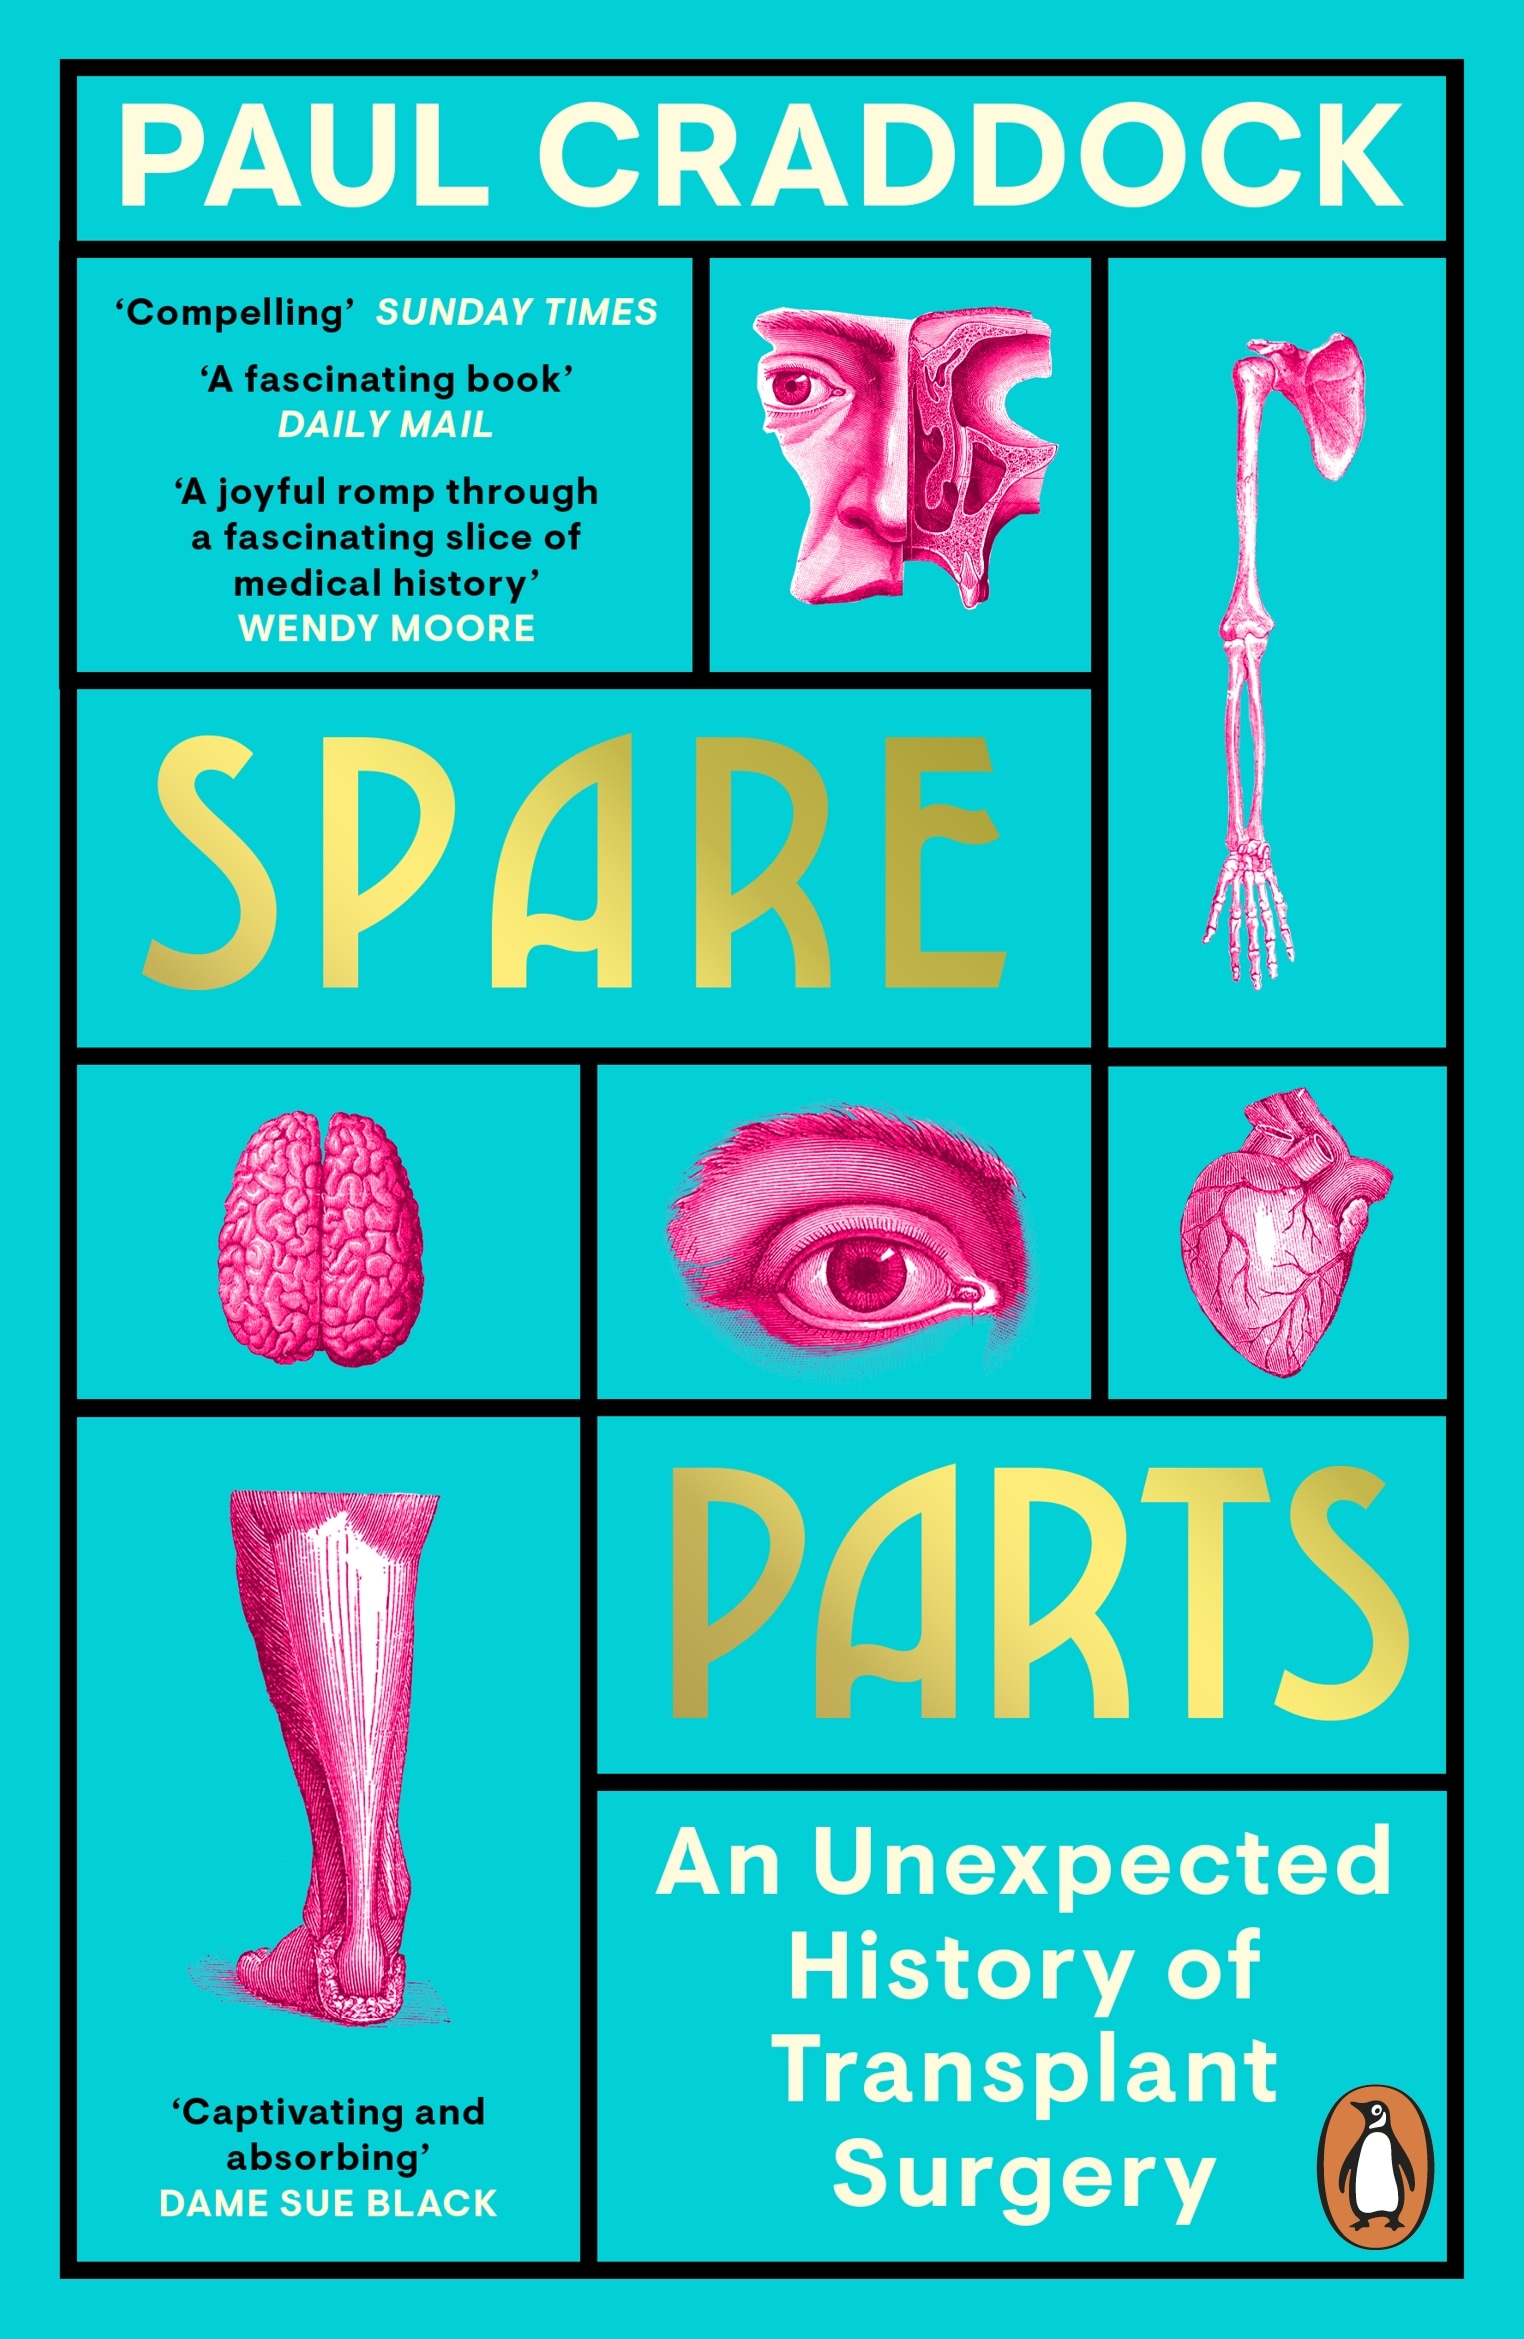 Book “Spare Parts” by Paul Craddock — August 25, 2022